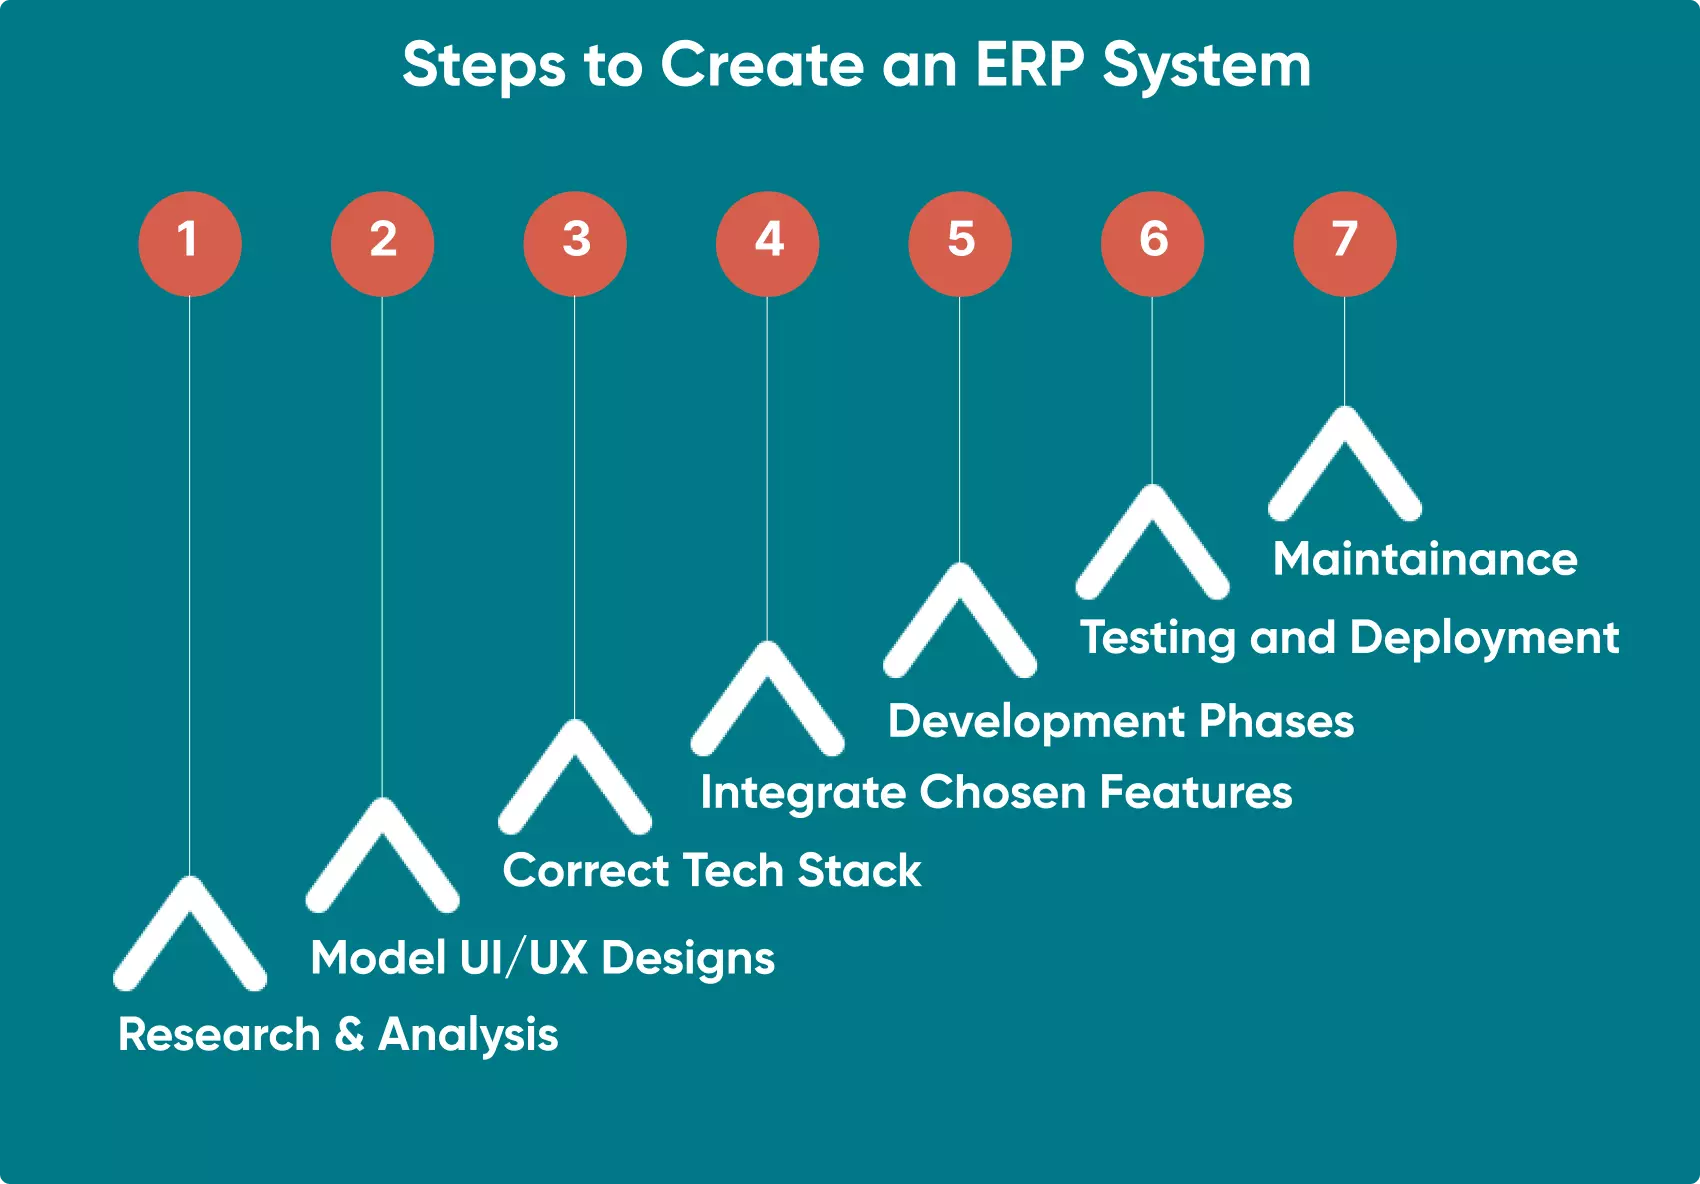 Seven steps to create an ERP system from research through to maintenance. 